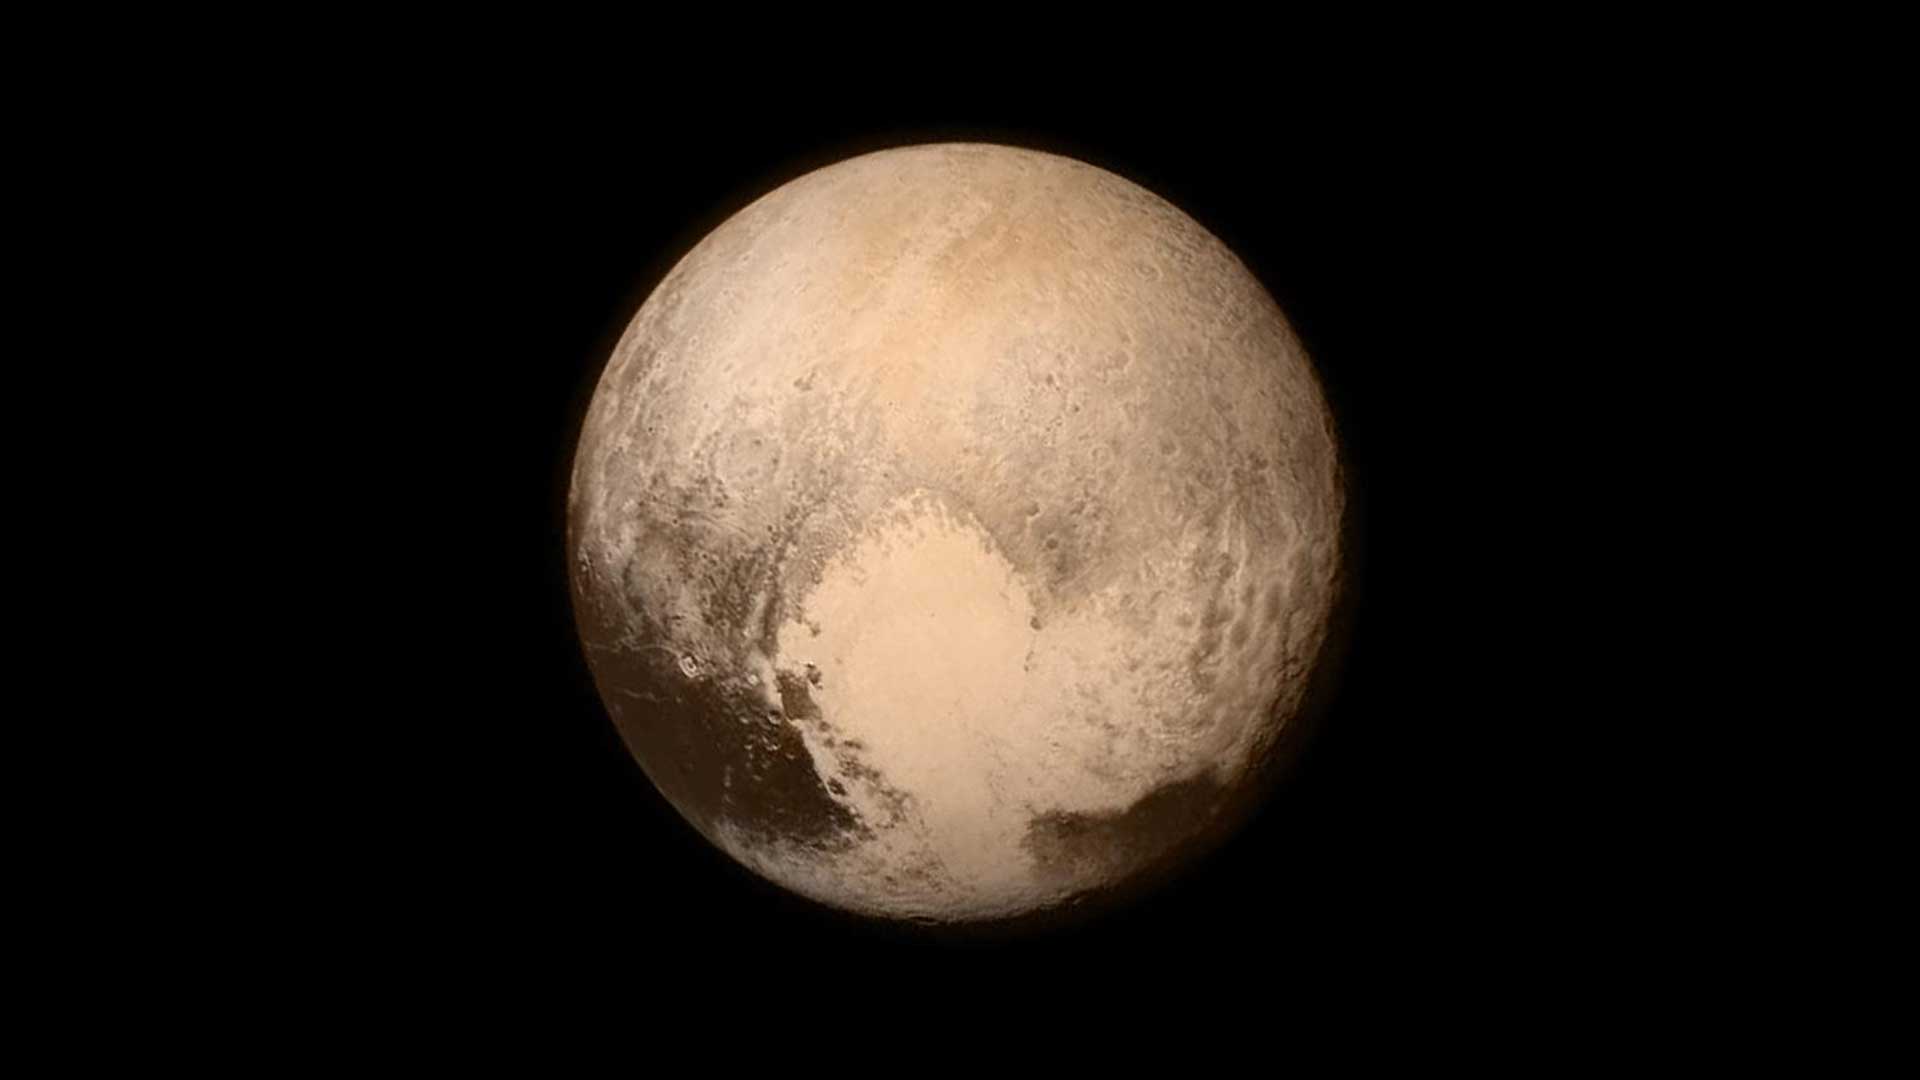 Pluto is reddish and has a heart shape lighter patch in the lower right half of this image from the New Horizons spacecraft.